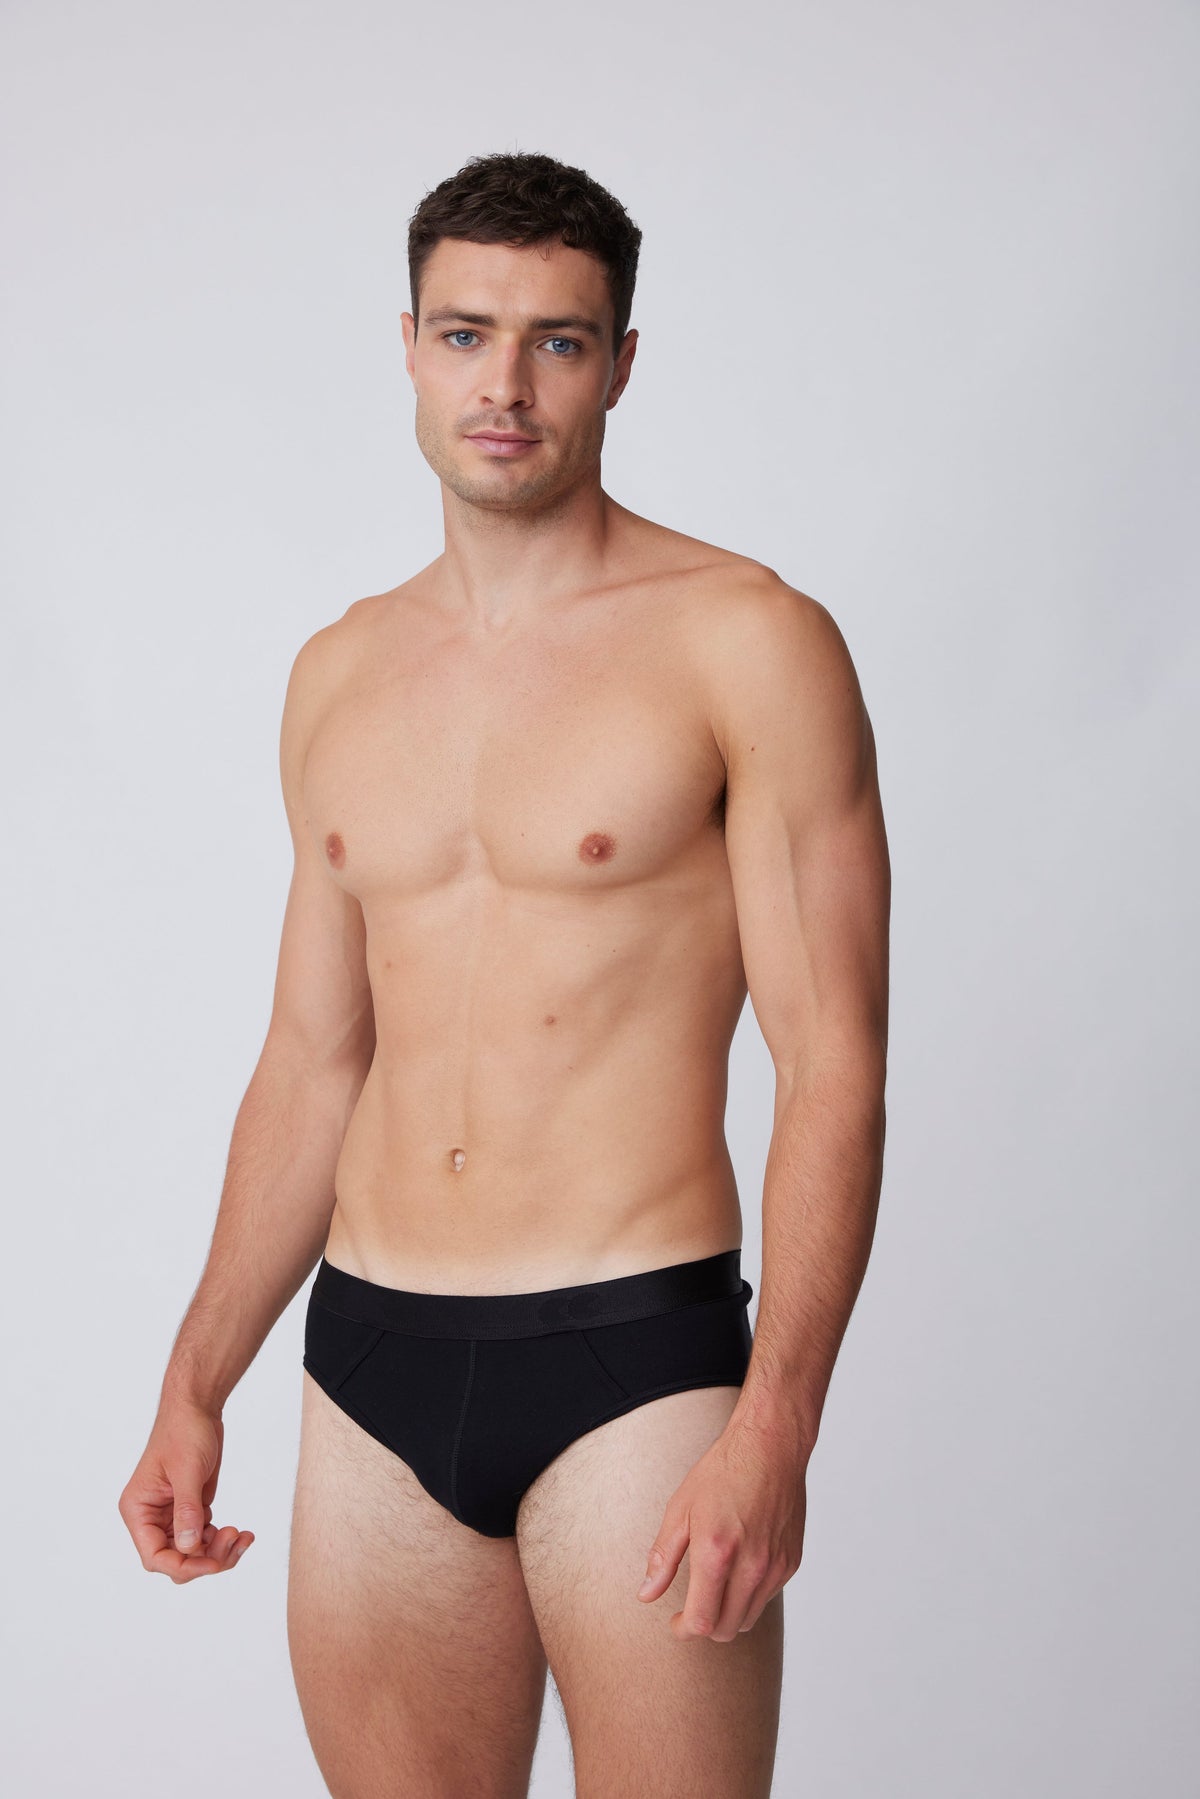 
            White, brunet male wearing only black brief 